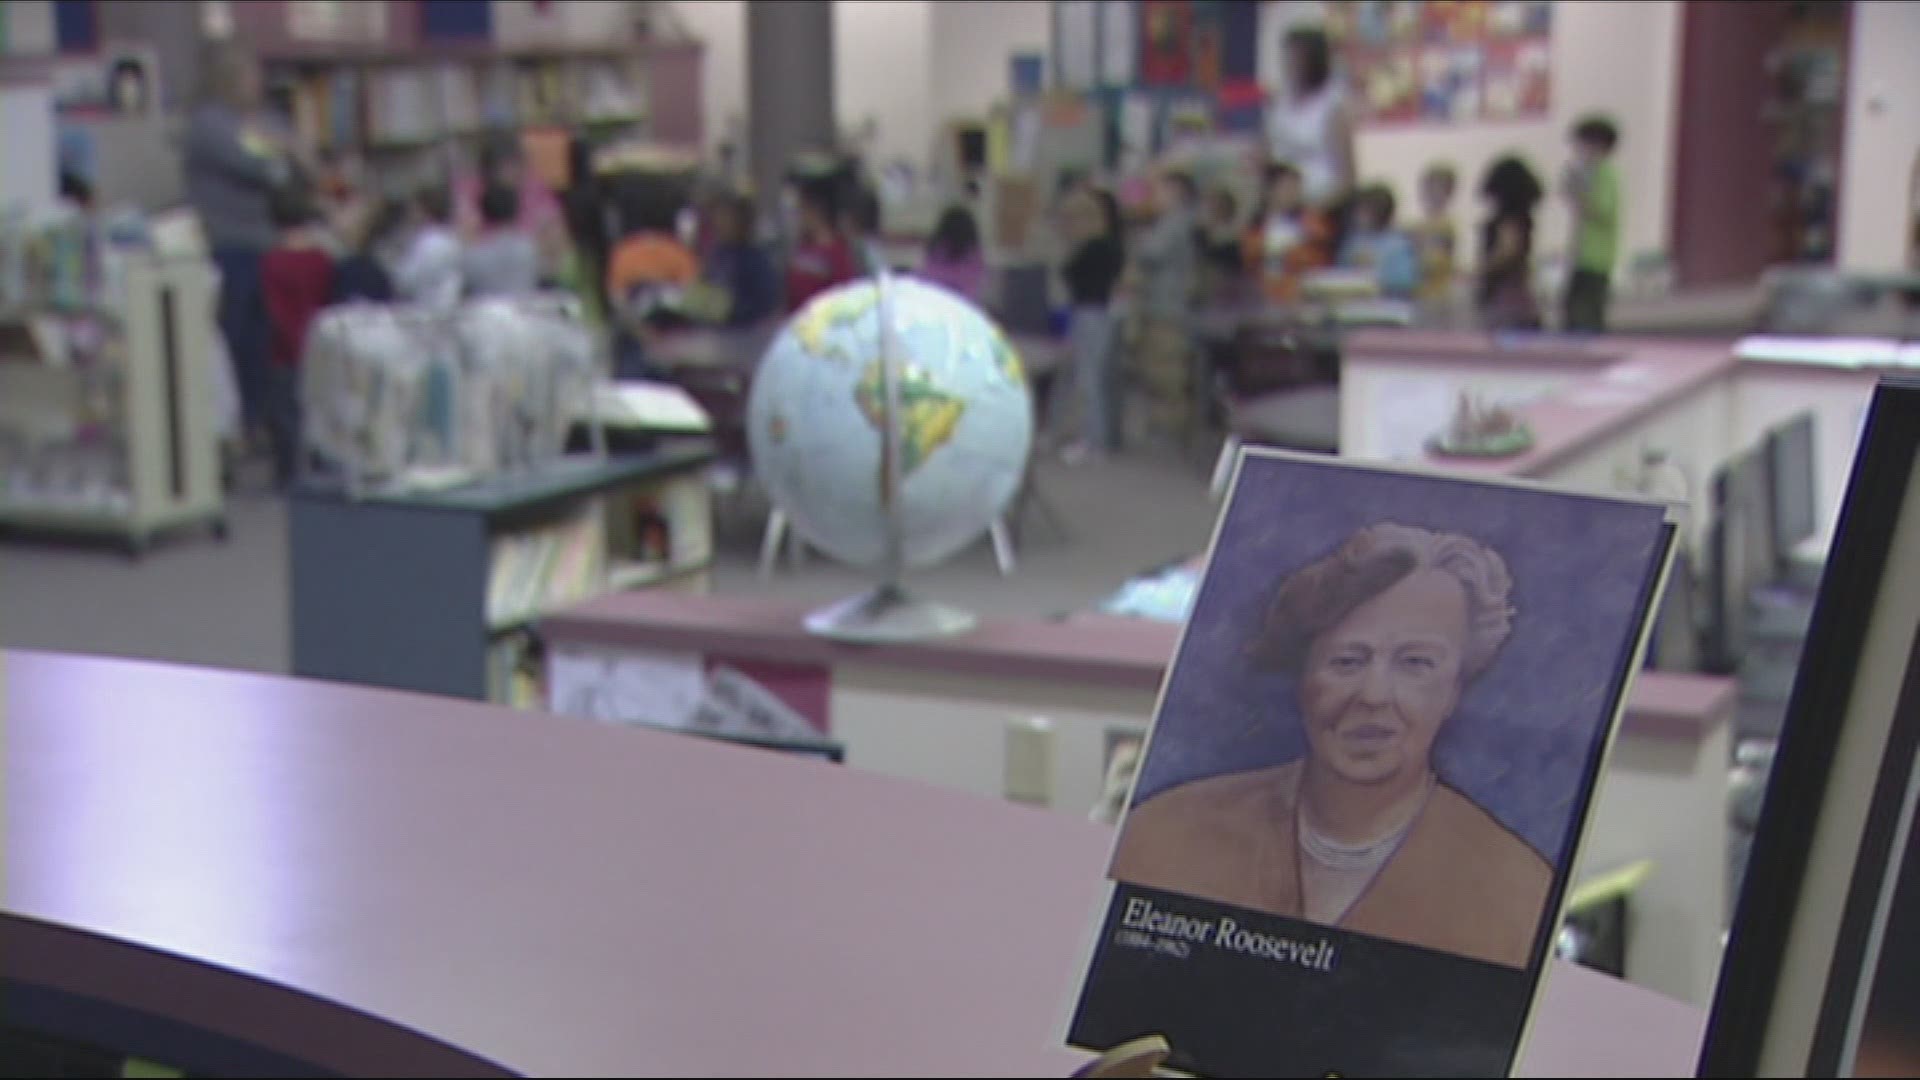 Teachers in Washington are now eligible for the COVID-19 vaccine. Tim Gordon reports on how teachers are signing up.